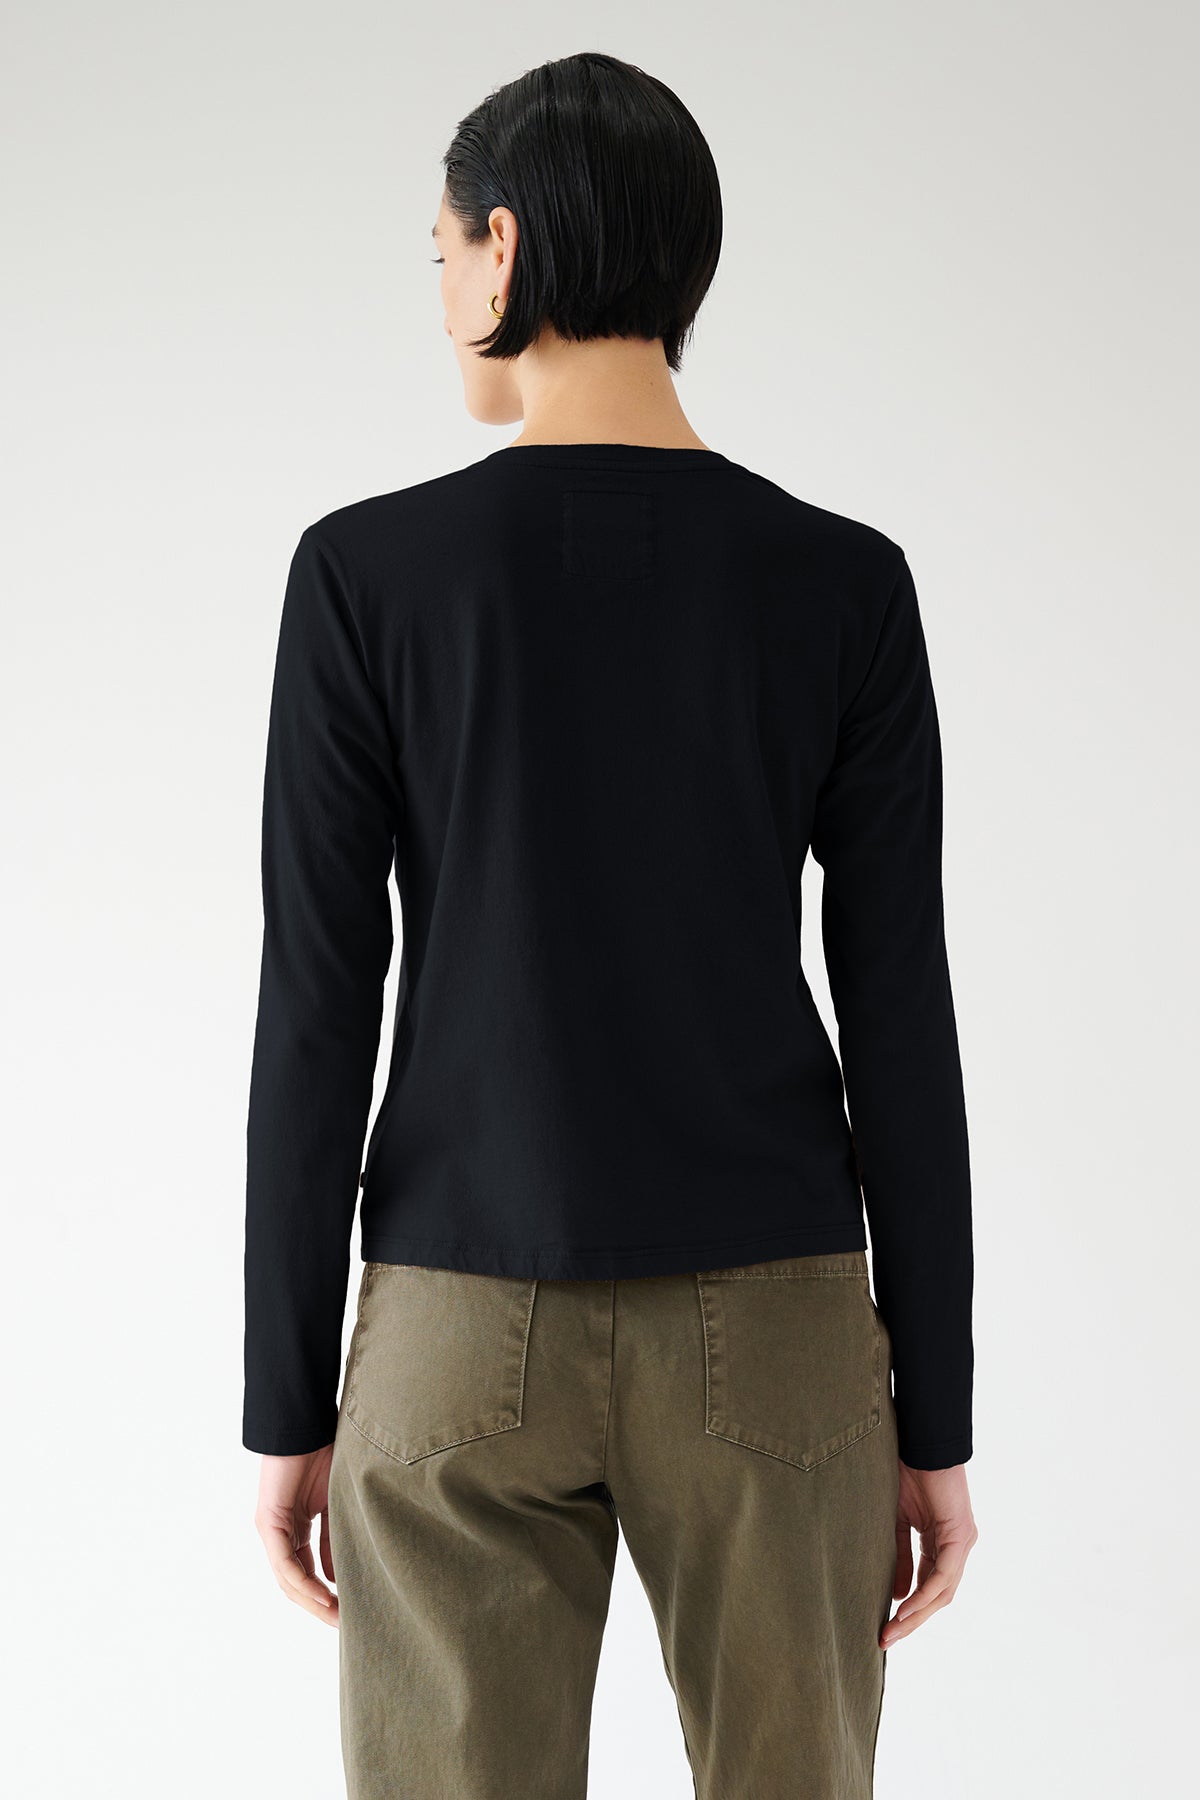   Woman wearing a Velvet by Jenny Graham VICENTE TEE in black and olive pants seen from the back. 